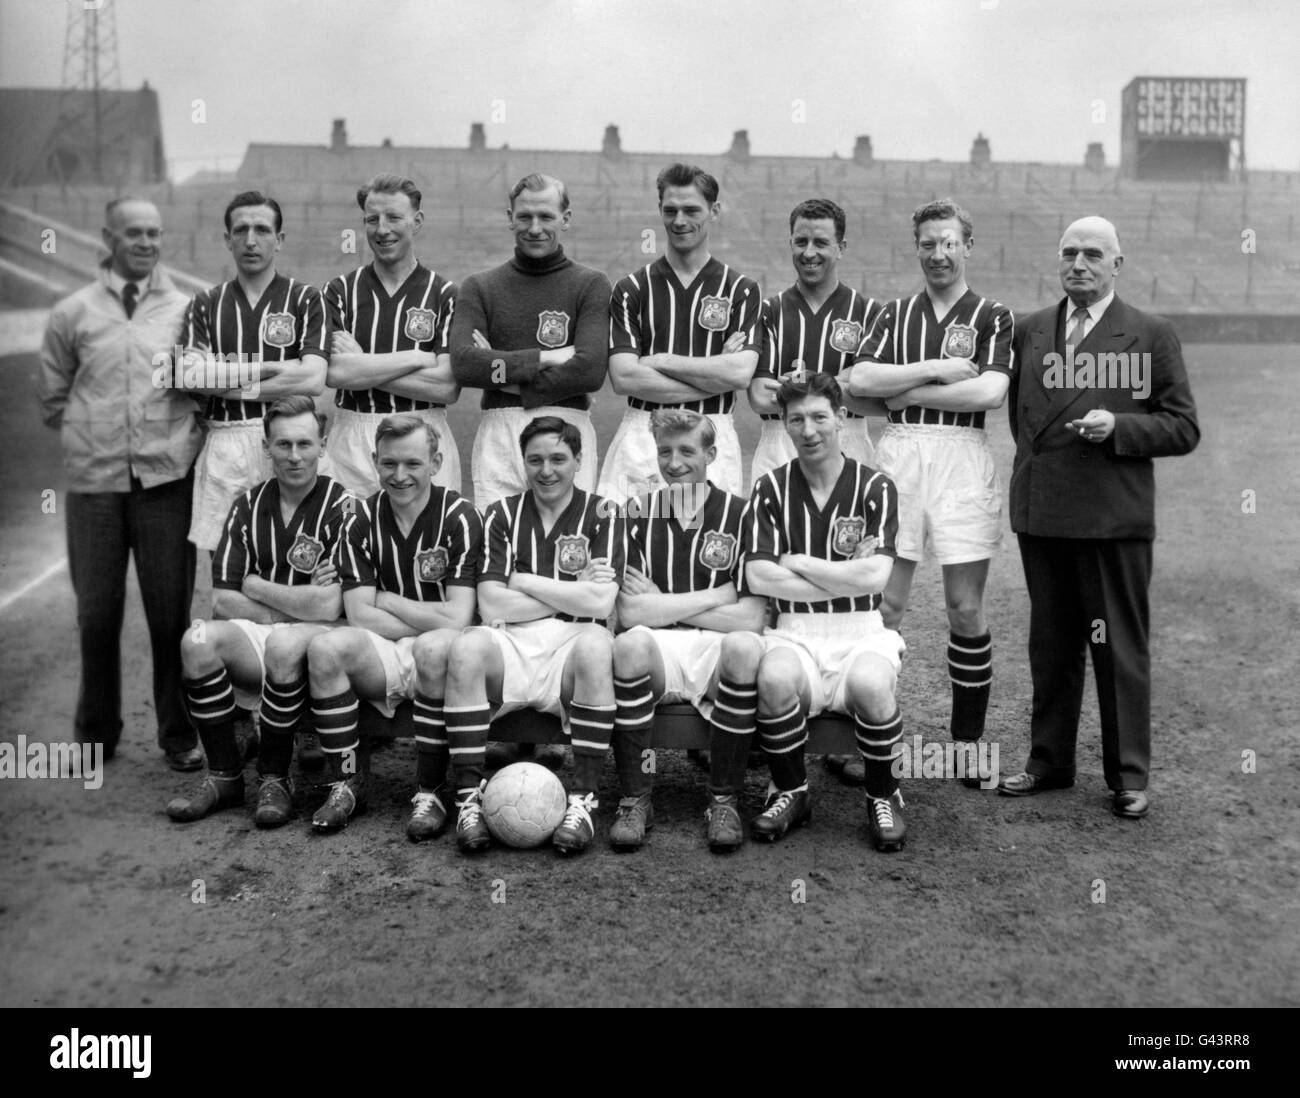 Pictured at Maine Road, Manchester, in the new striped jerseys they will wear at Wembley are the probable Manchester City team for the FA Cup final against Birmingham City. Srtanding, left to right: Laurie Barnett (trainer); Kenneth Barnes; David Ewing; Bert Trautmann; William Leivers; Roy Paul; Roy Little; and Walter Smith (Chairman). Seated, left to right: William Spurdle; Joseph Hayes; Robert Johnstone; Jack Dyson and Royston Clarke. Stock Photo